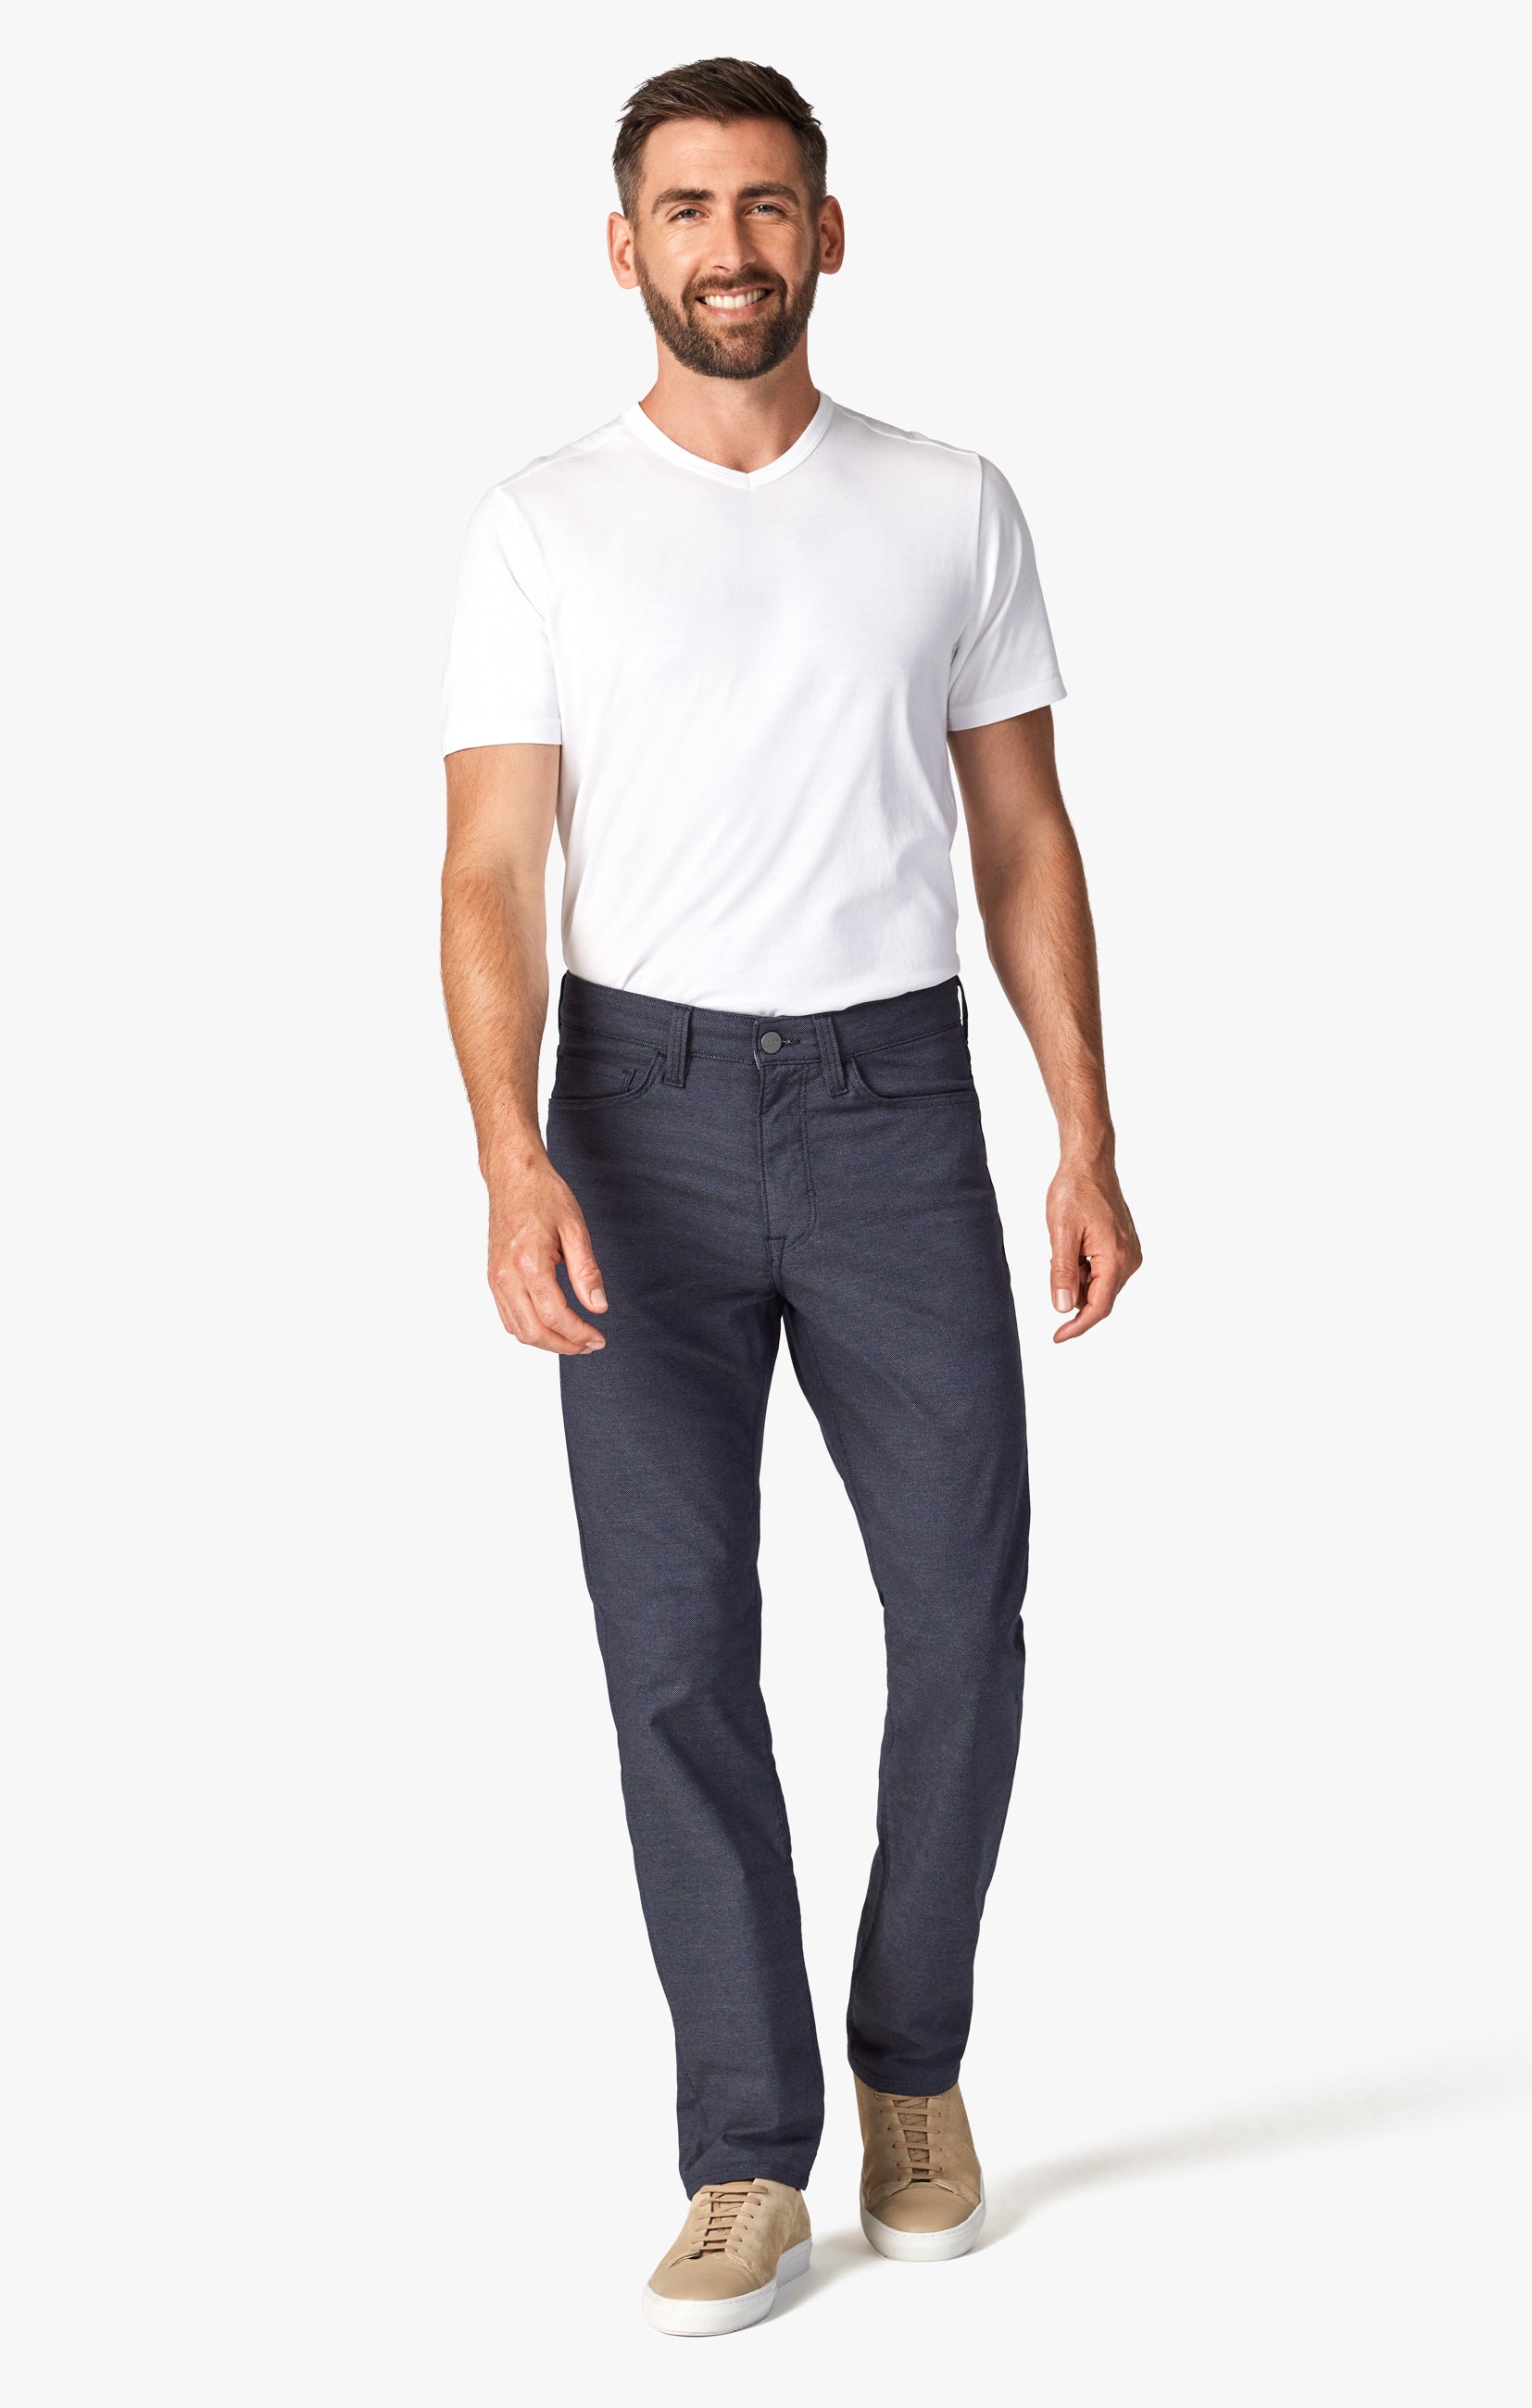 Charisma Relaxed Straight Pants In Navy Coolmax Image 2